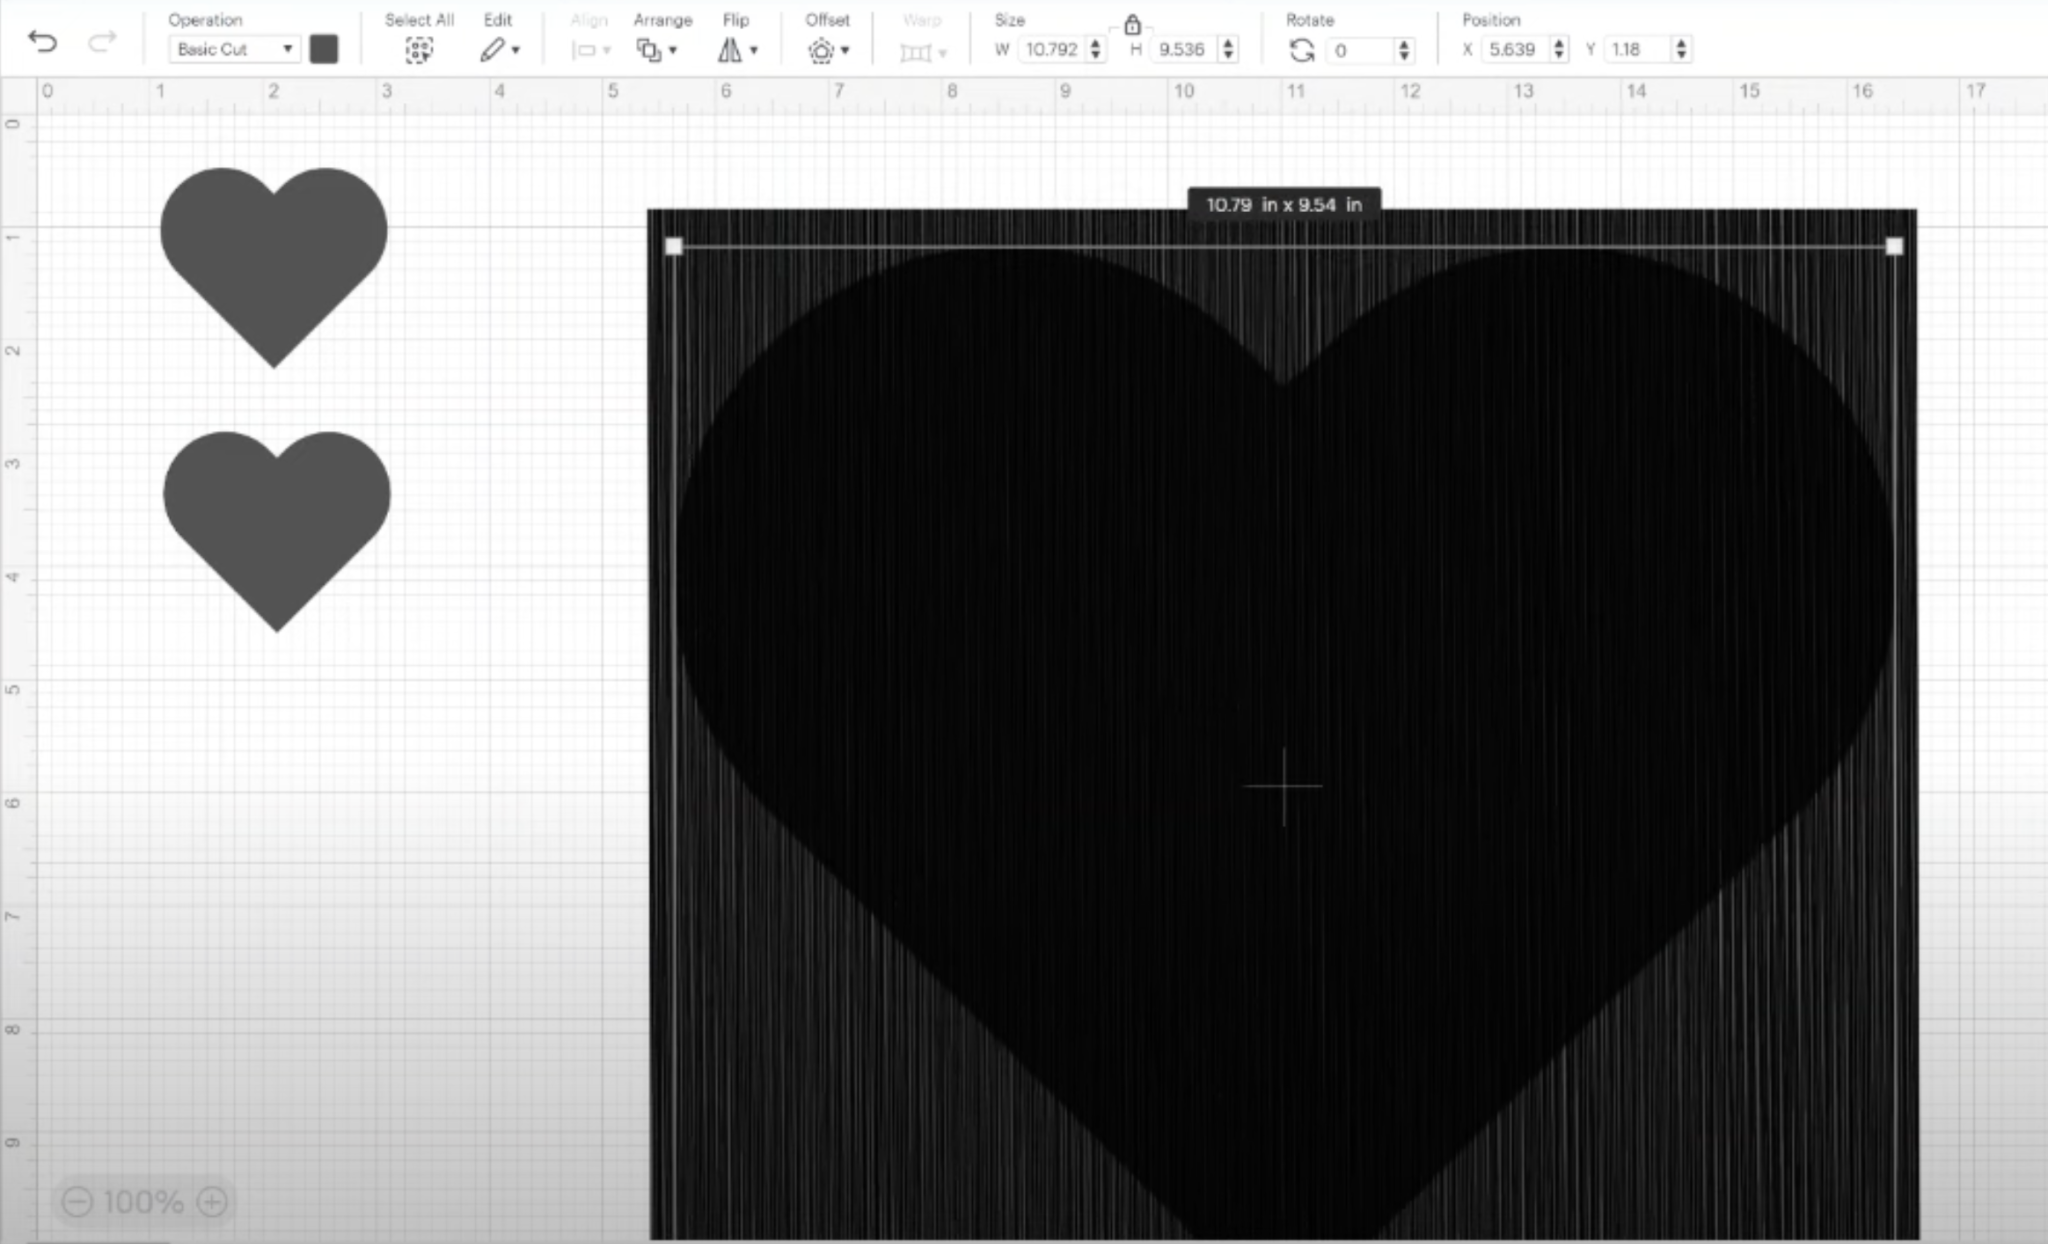 Heart shape resized large to fit on pattern fill file.